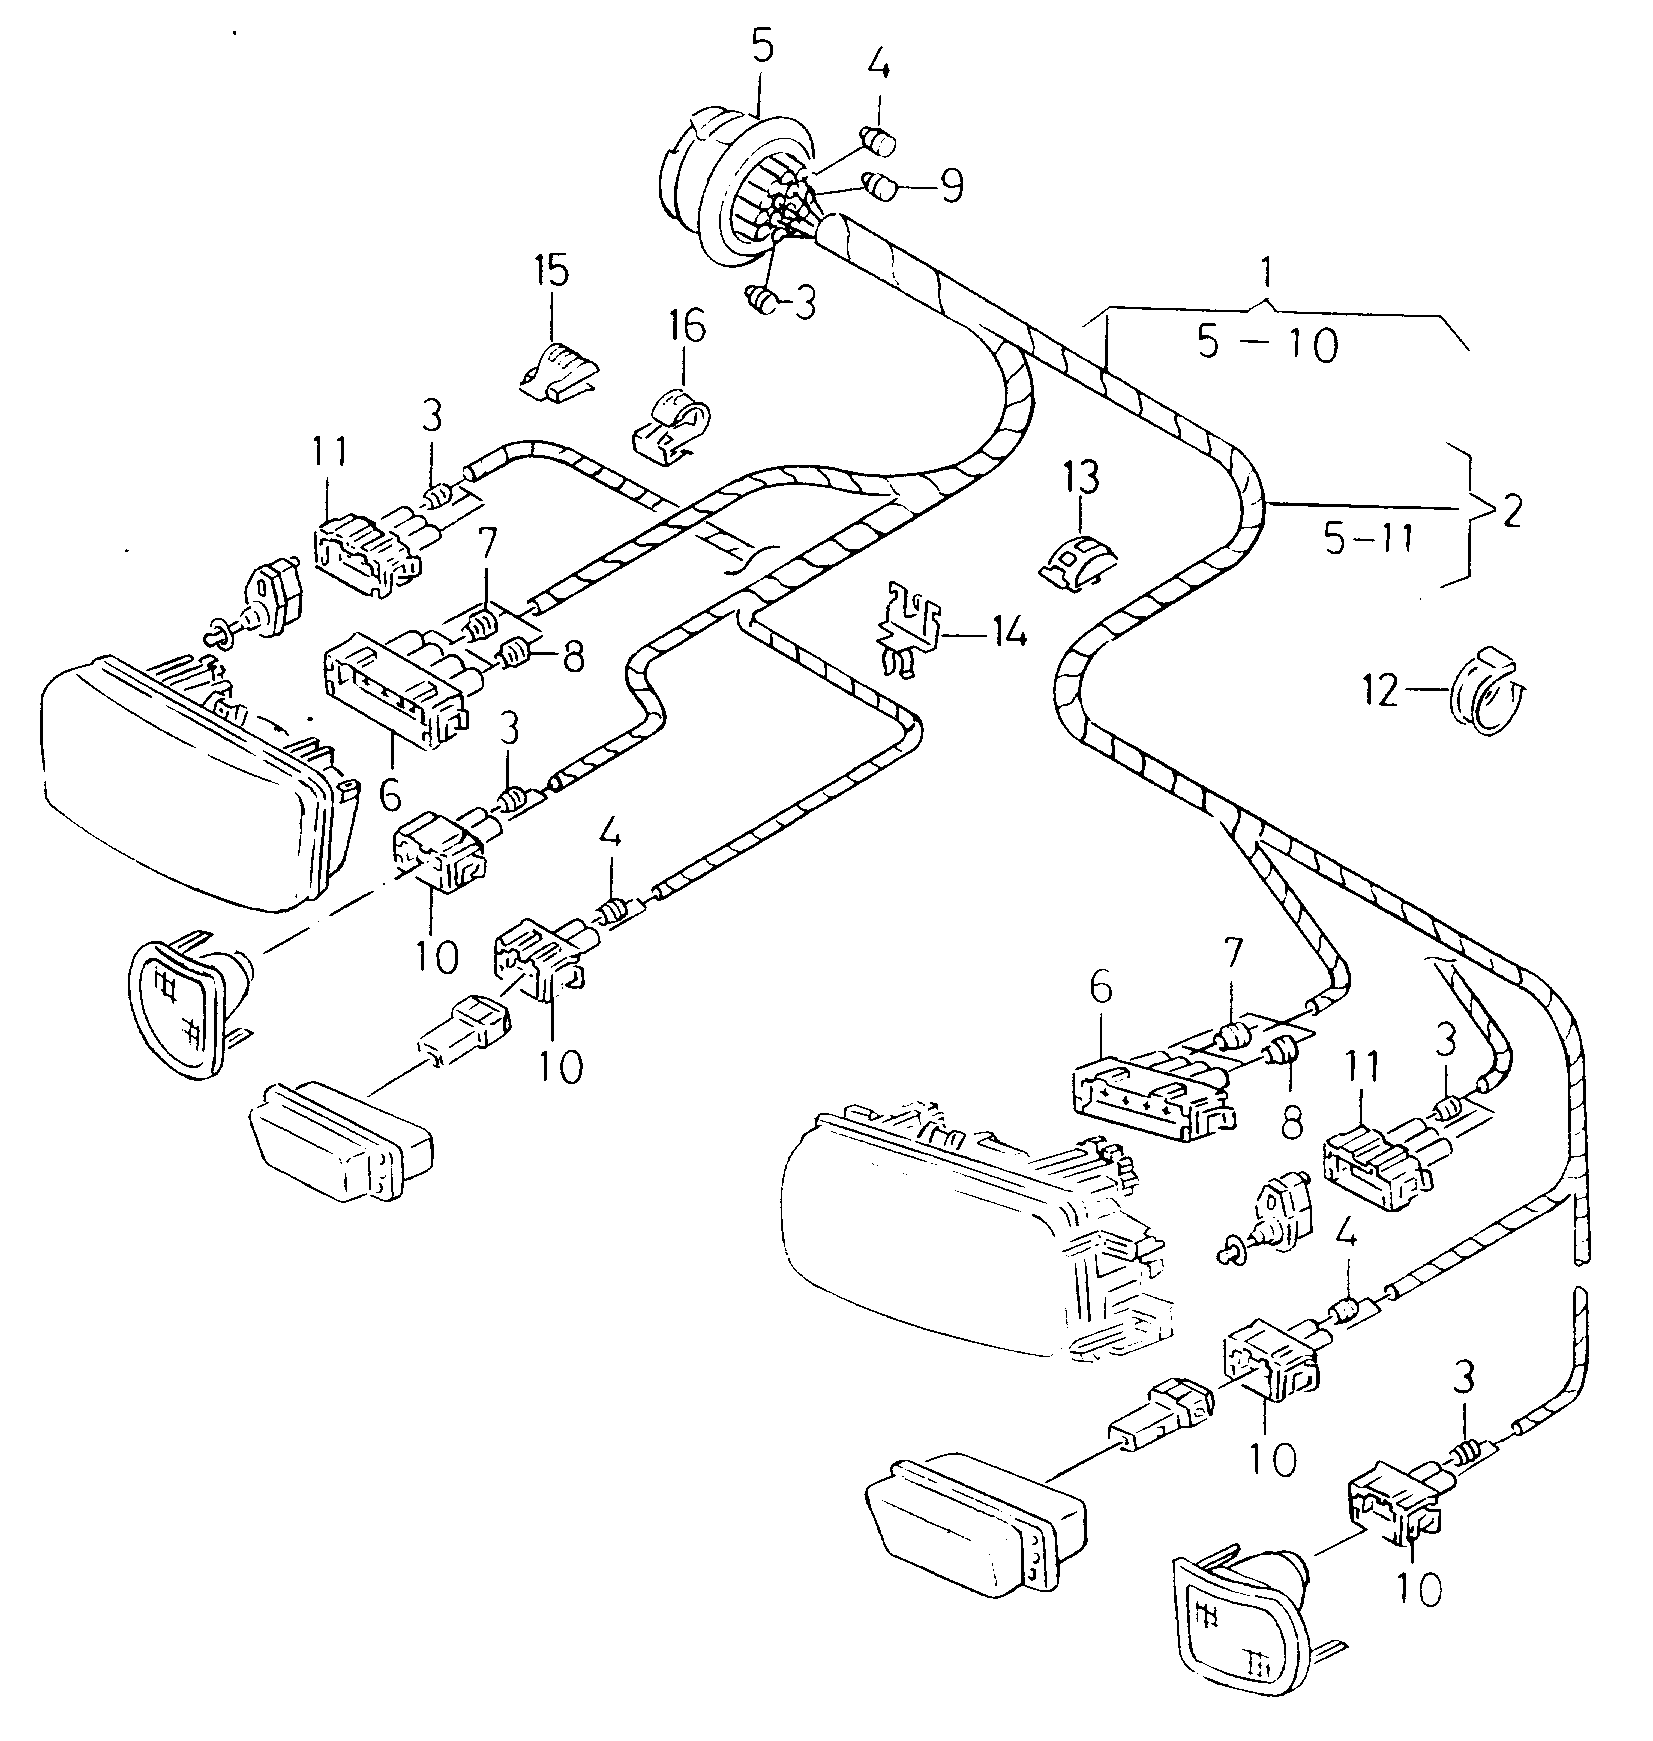 harness for vehicle lighting - Caddy(CA)  